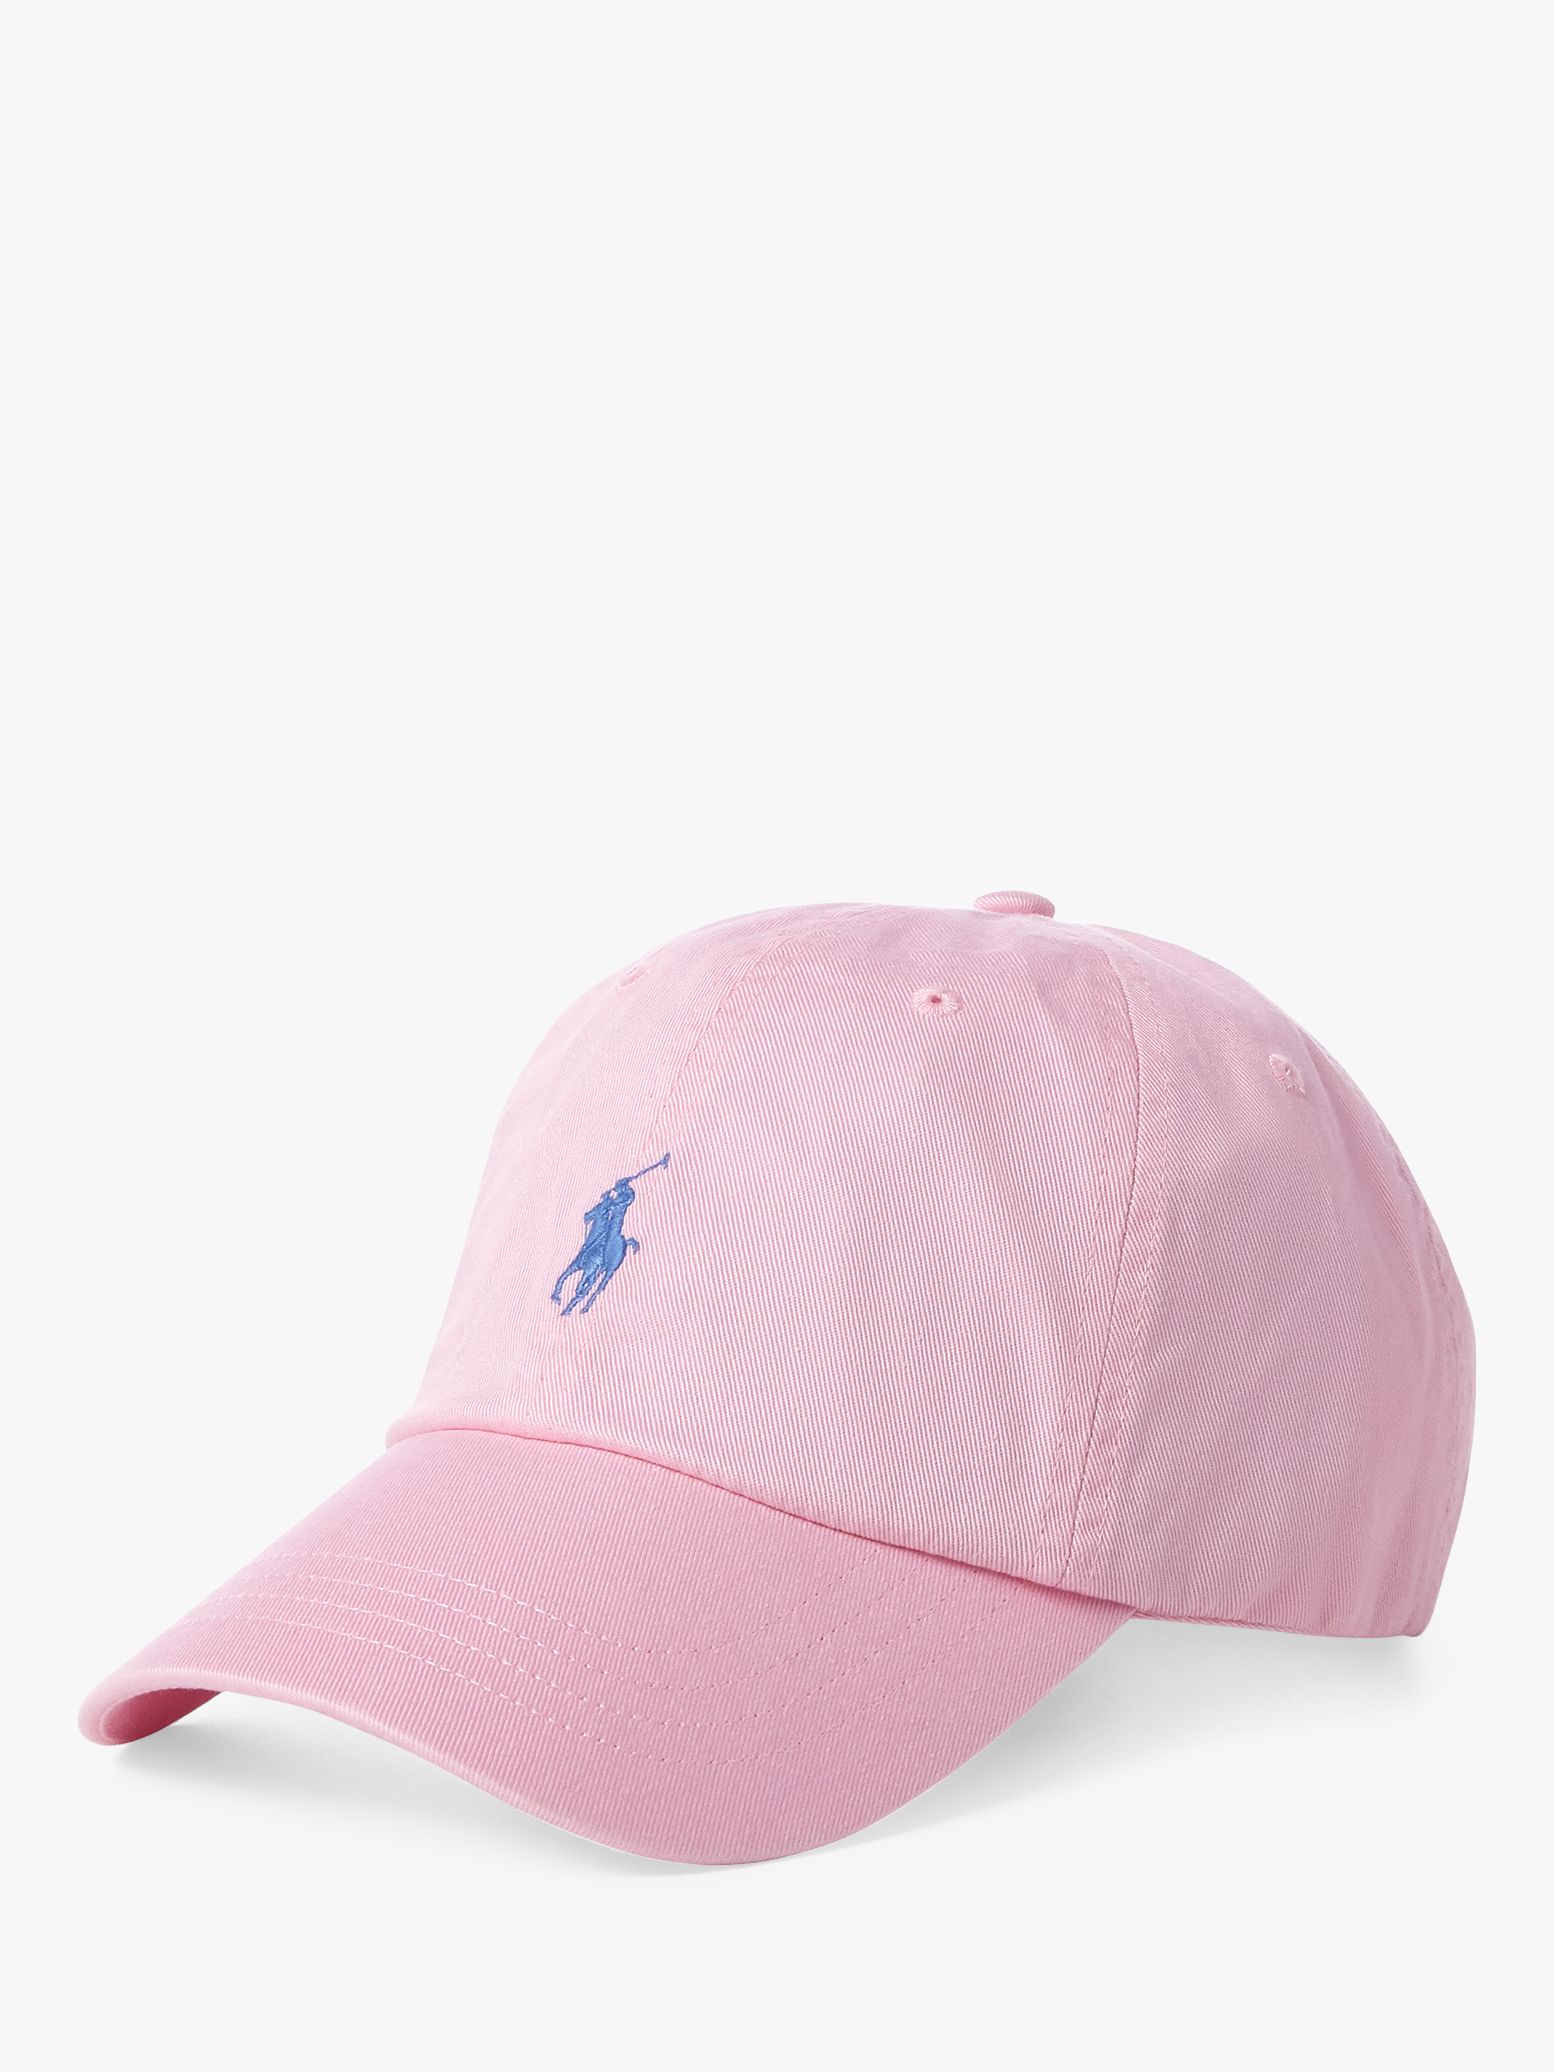 light pink polo hat